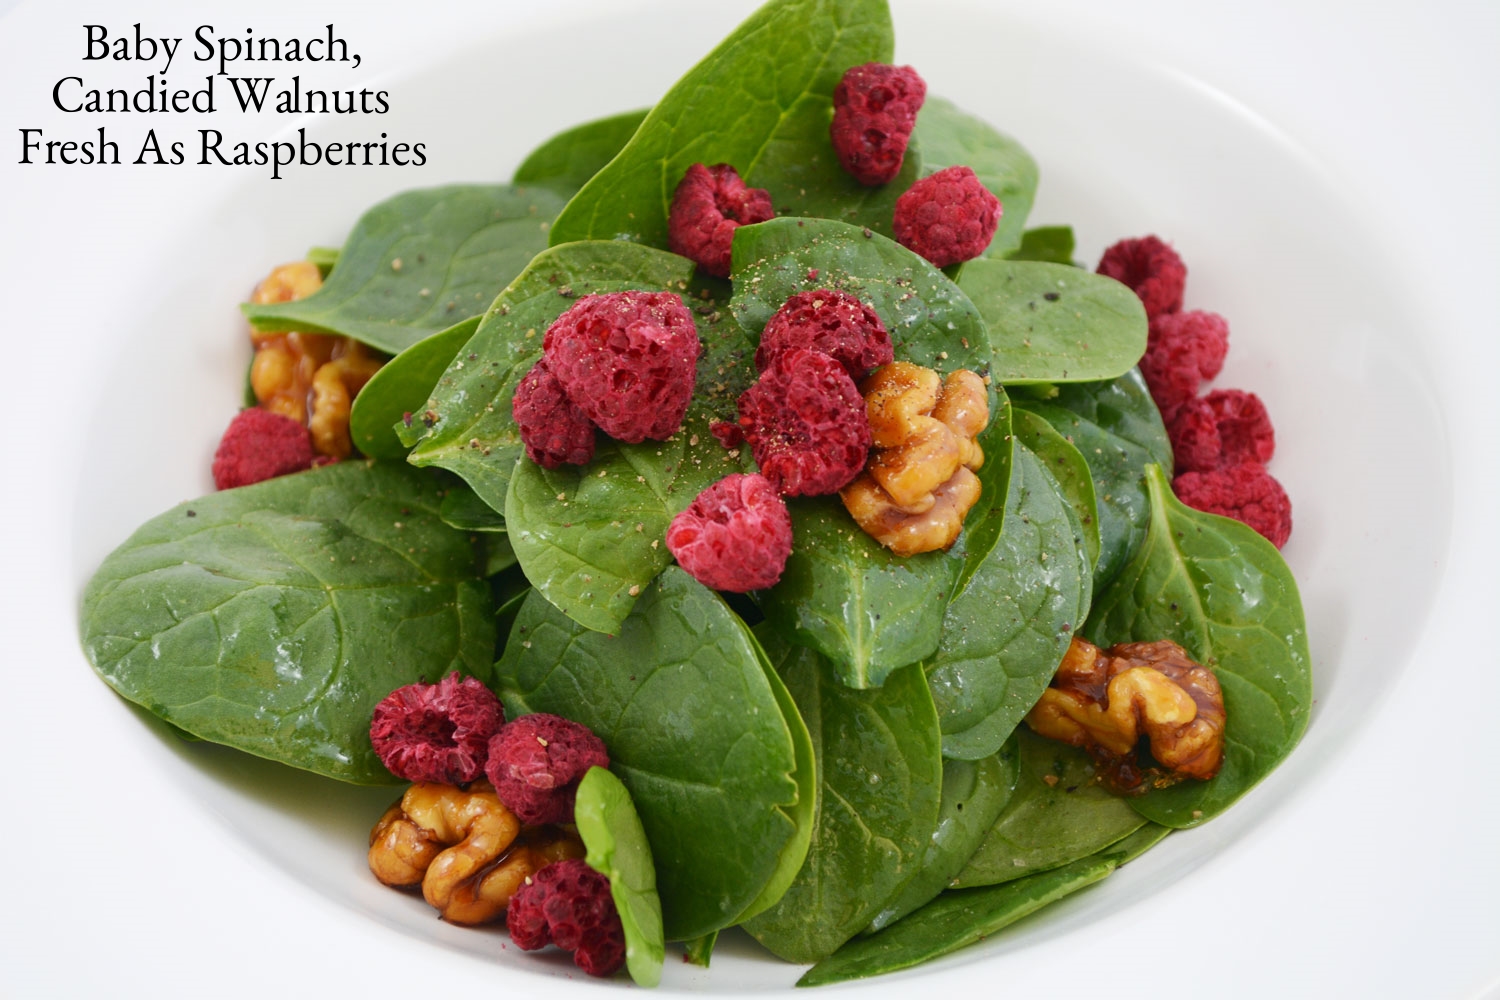 BAY-SPINACH-SALAD-TOSSED-WITH-WALNUT-OIL,-FRESH-AS-RASPBERRIES-AND-CANDIED-WALNUTS.jpg